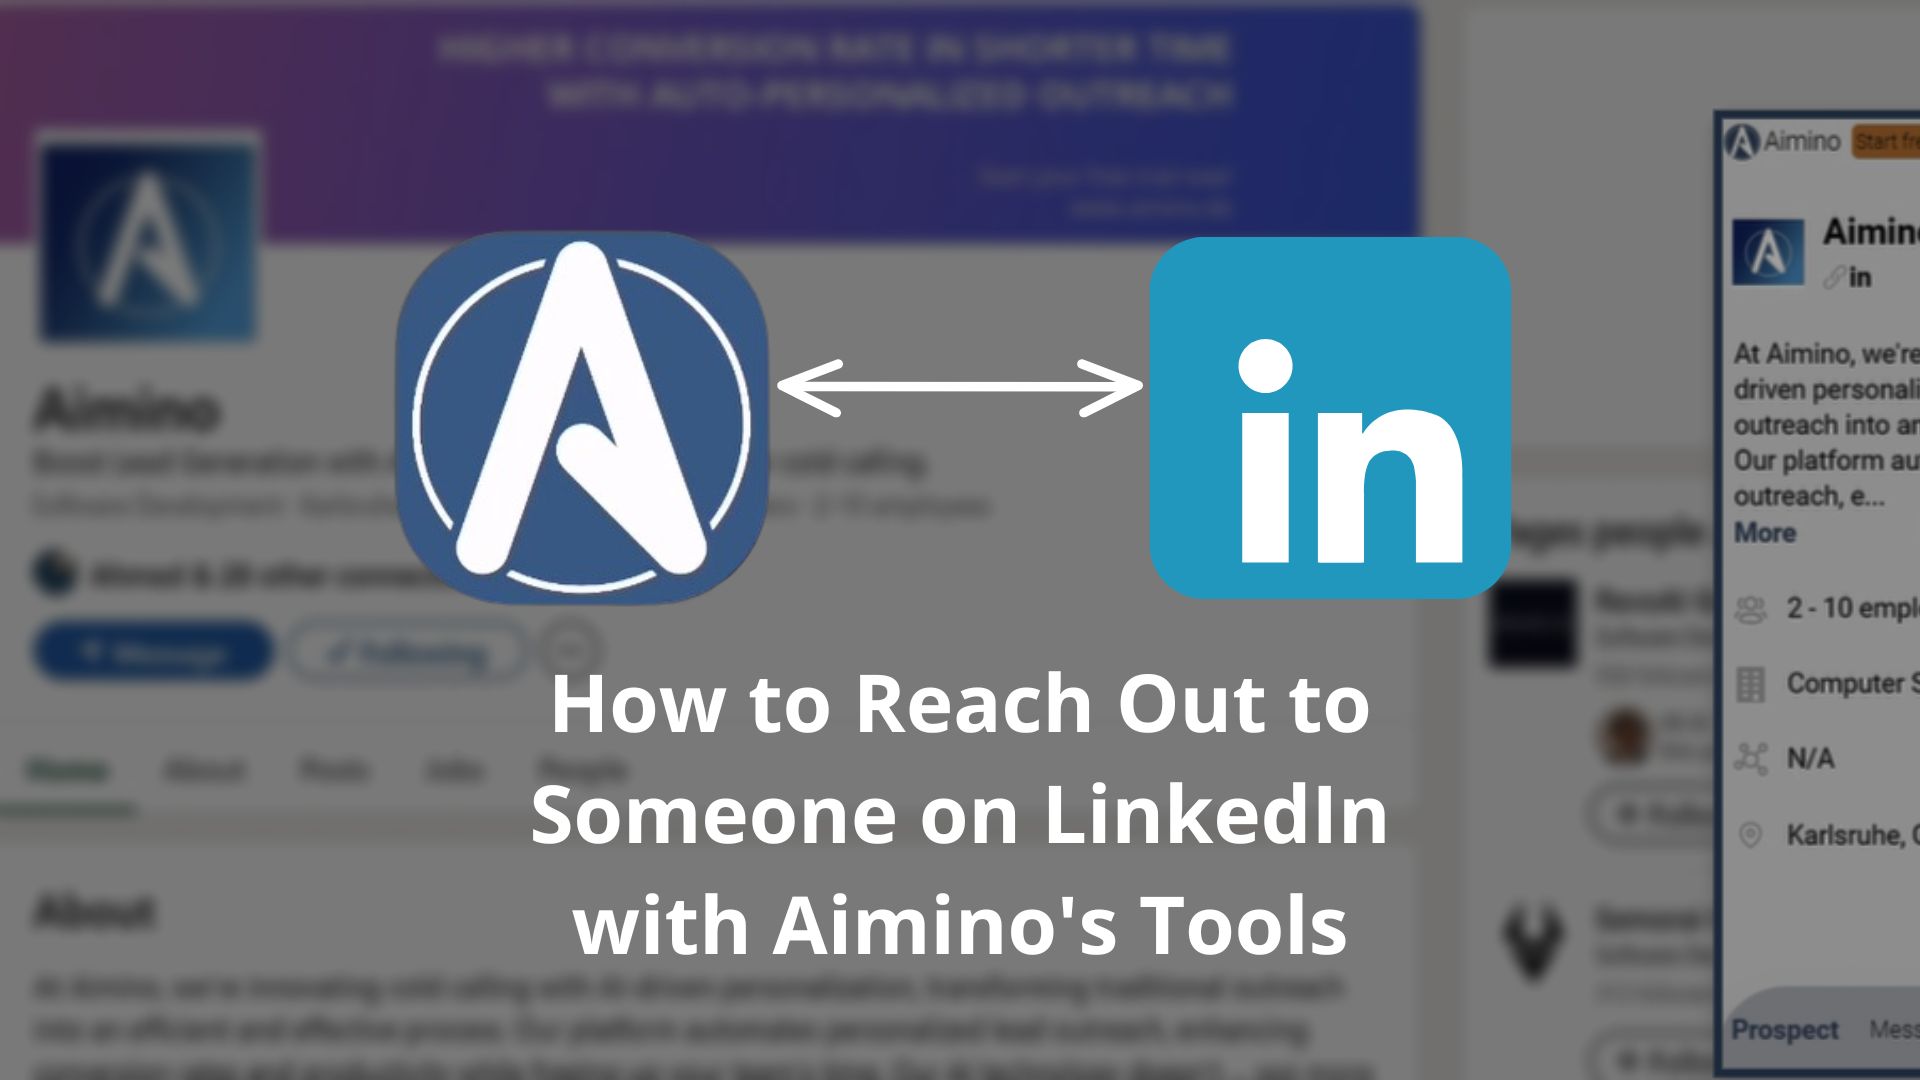 How to Reach Out to Someone on LinkedIn with Aimino’s Tools